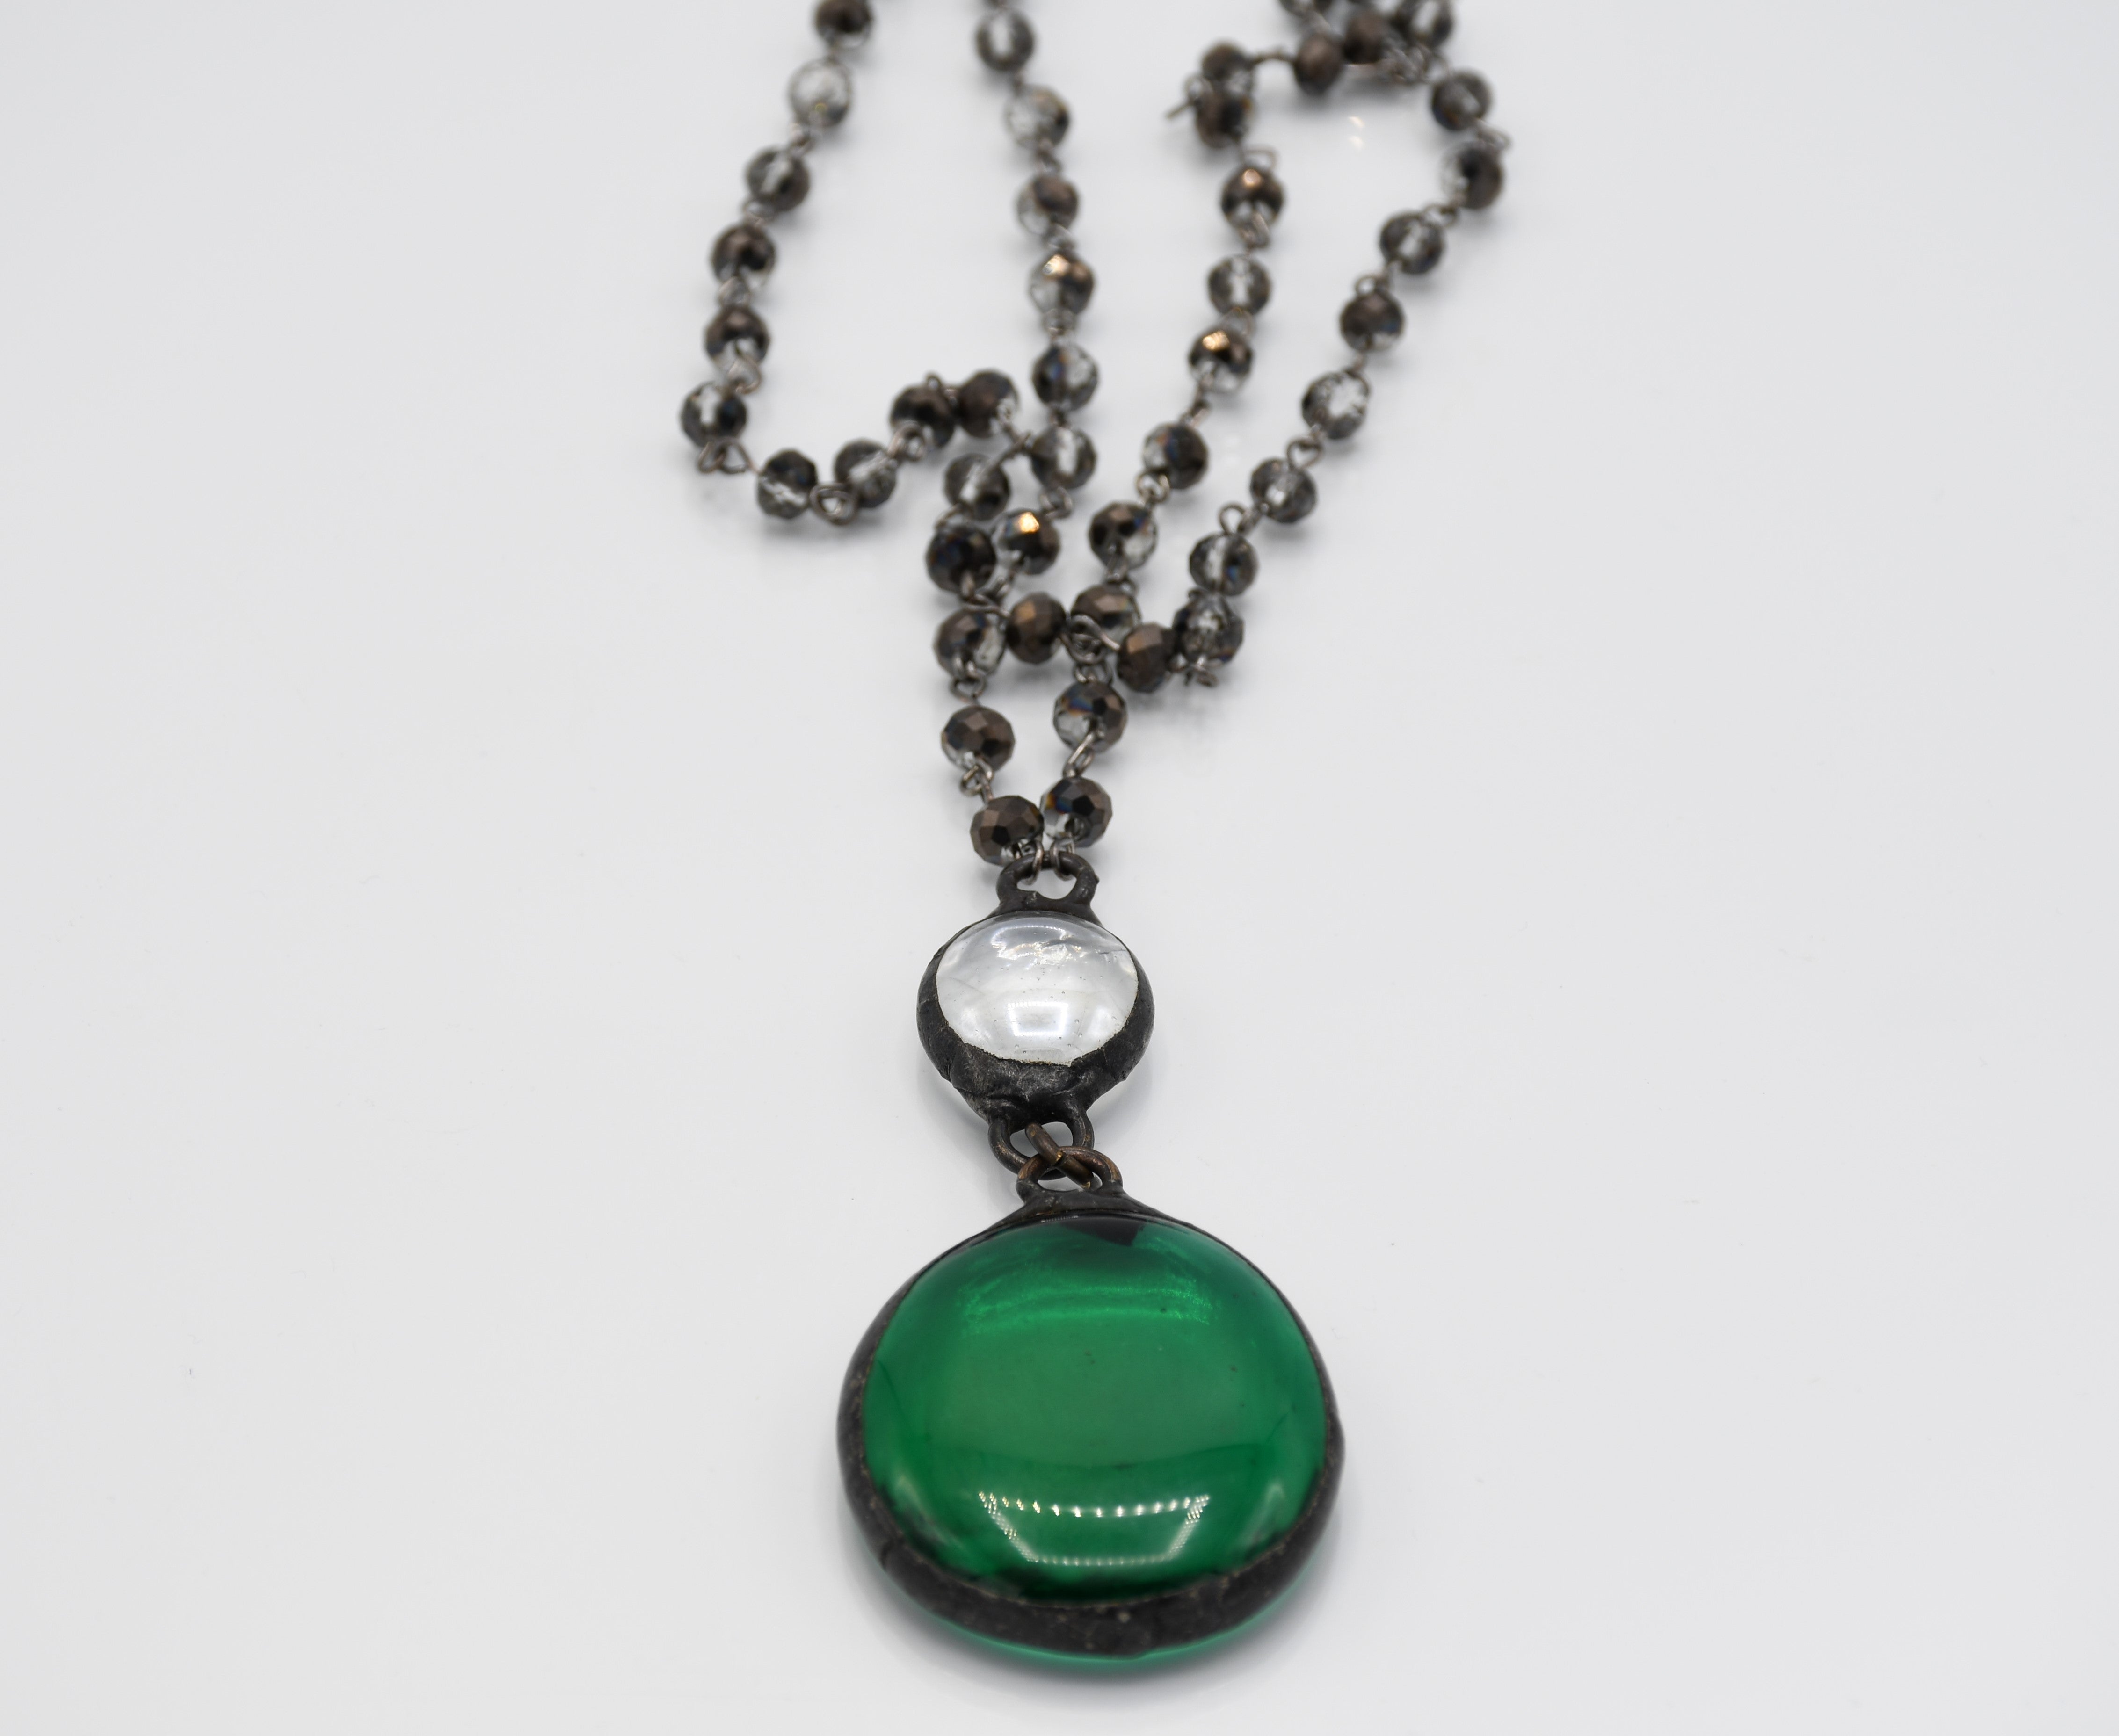 Emerald Green and clear glass soldered necklace